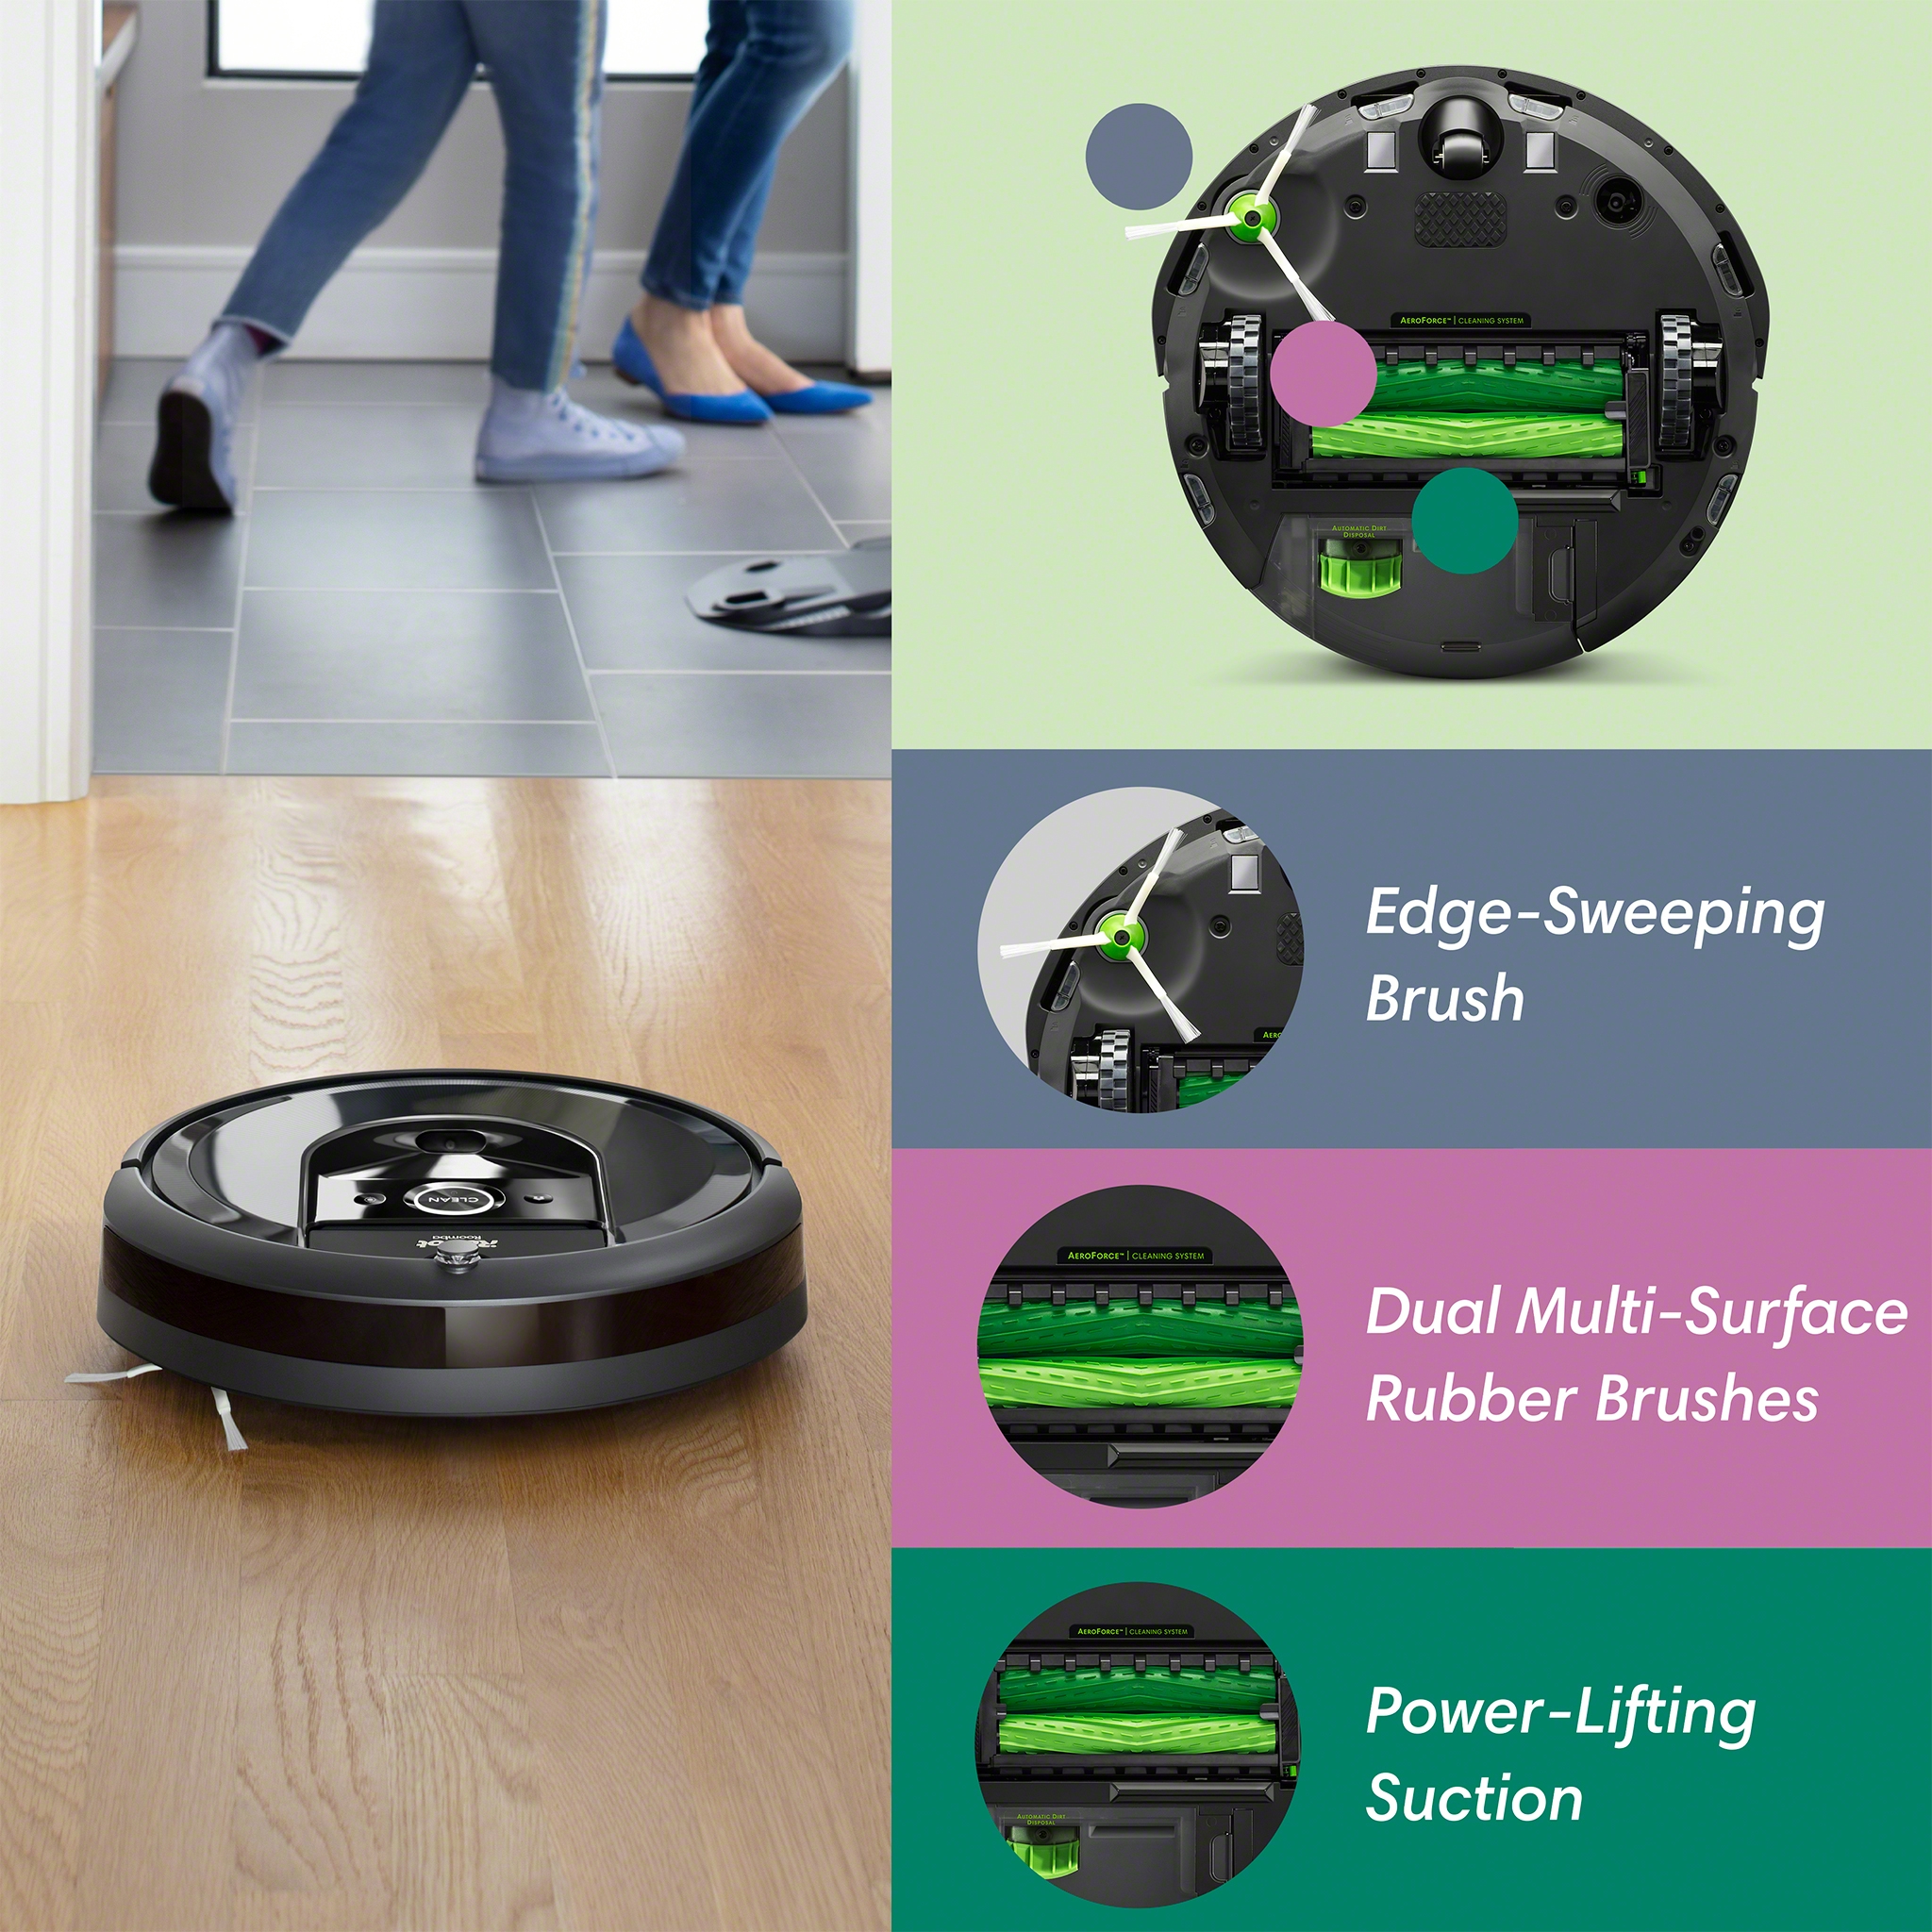 iRobot Roomba i7 (7150) Robot Vacuum- Wi-Fi Connected, Smart Mapping, Works with Google Home, Ideal for Pet Hair, Carpets, Hard Floors - image 2 of 16